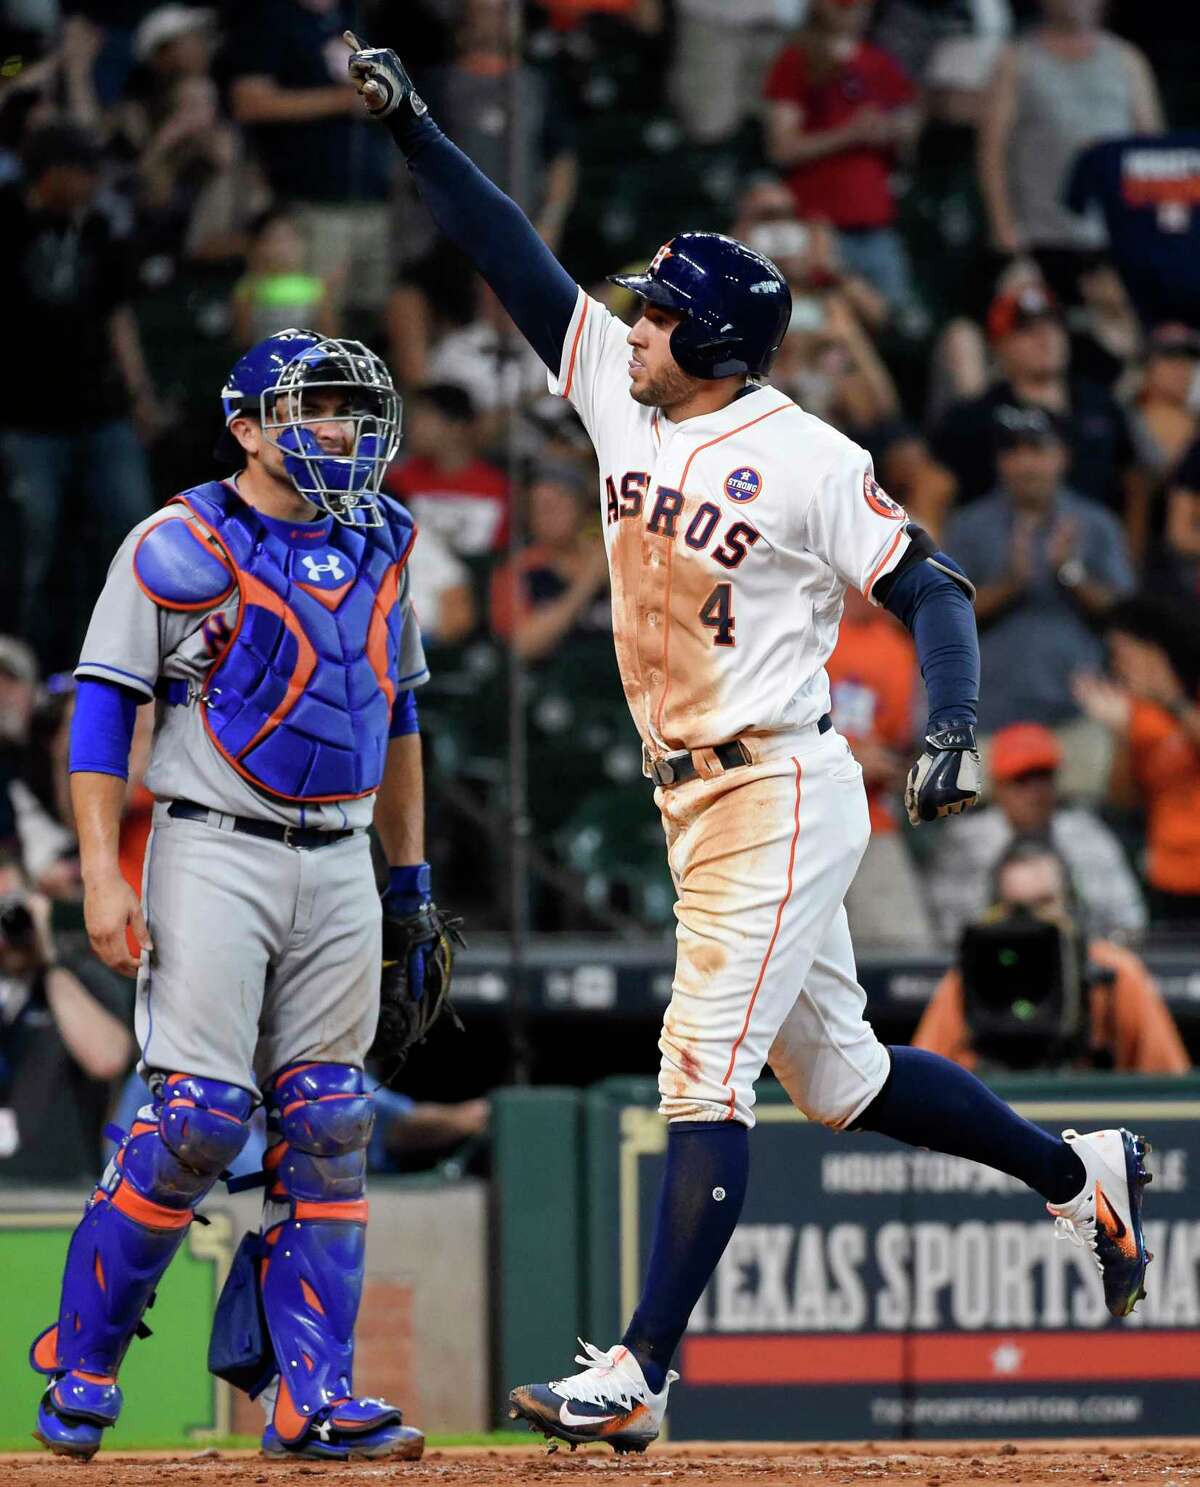 Houston Astros' George Springer (4) celebrates his two-run home run as New York Mets catcher Travis d'Arnaud looks on during the second inning of the first game of a baseball doubleheader, Saturday, Sept. 2, 2017, in Houston. (AP Photo/Eric Christian Smith)